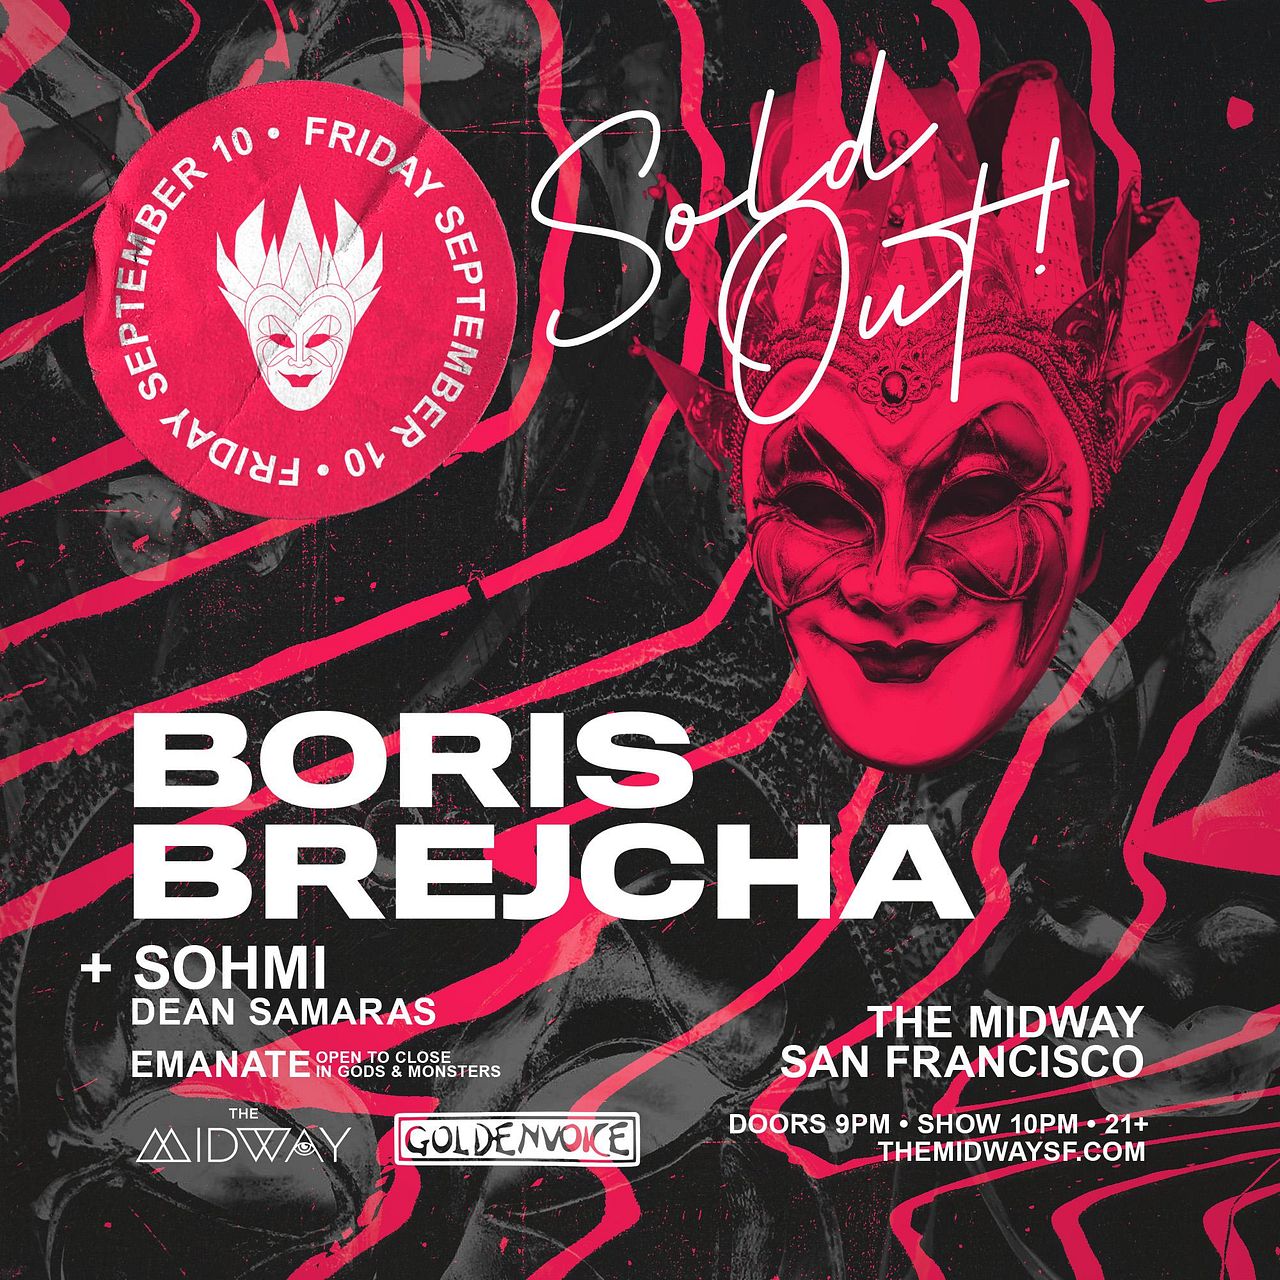 Boris Brejcha Tickets at The Midway in San Francisco by The Midway SF